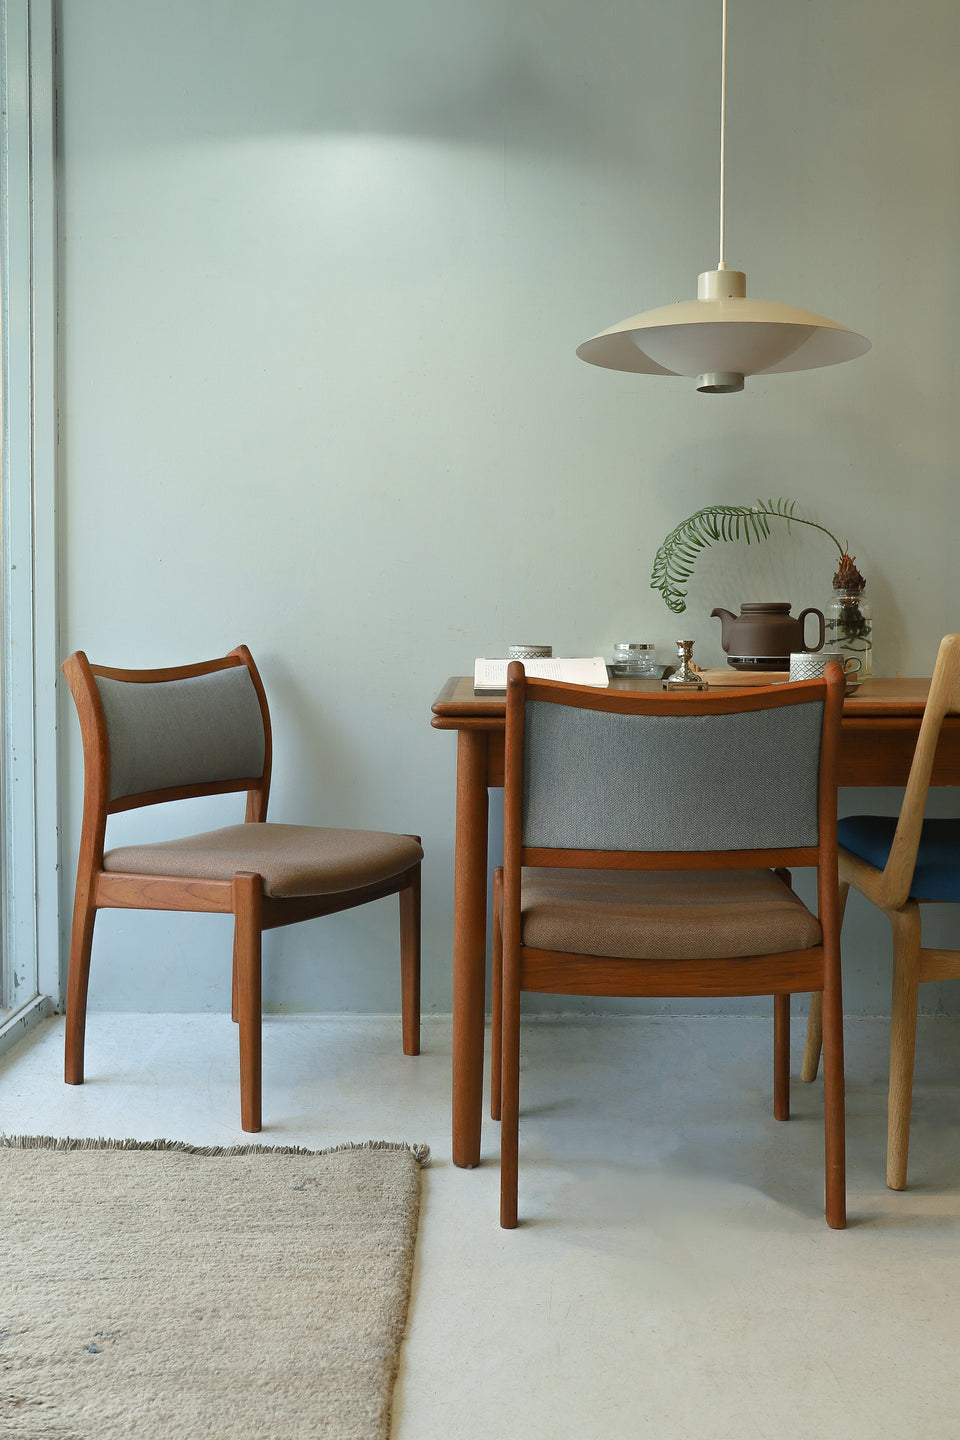 Teakwood Dining Chair Japanese Vintage/ジャパンヴィンテージ ダイニングチェア チーク材 北欧スタイル